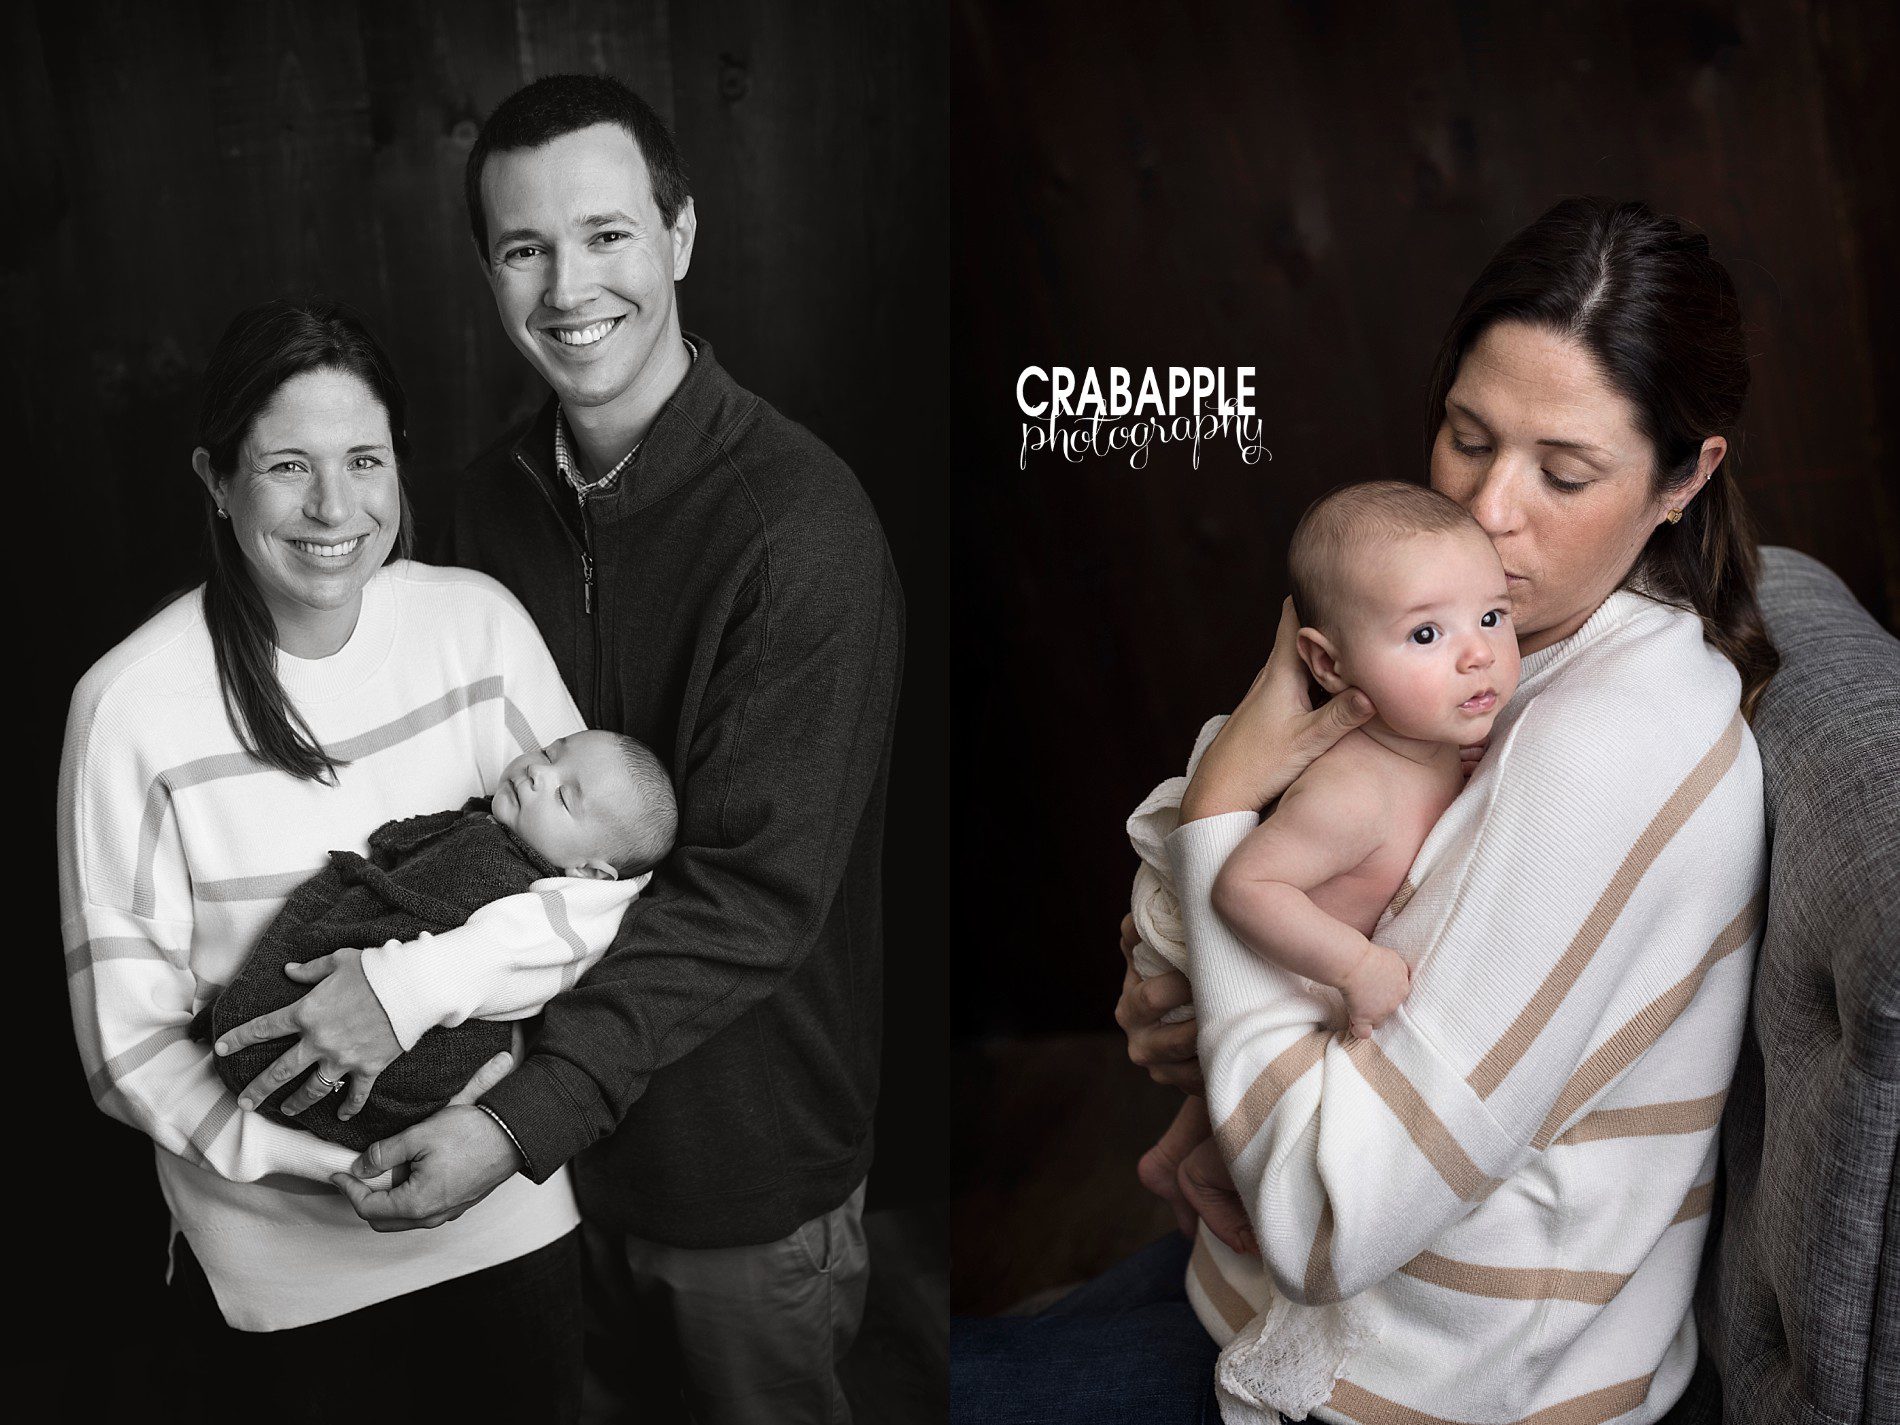 Portrait ideas for 3 month old baby and family pictures